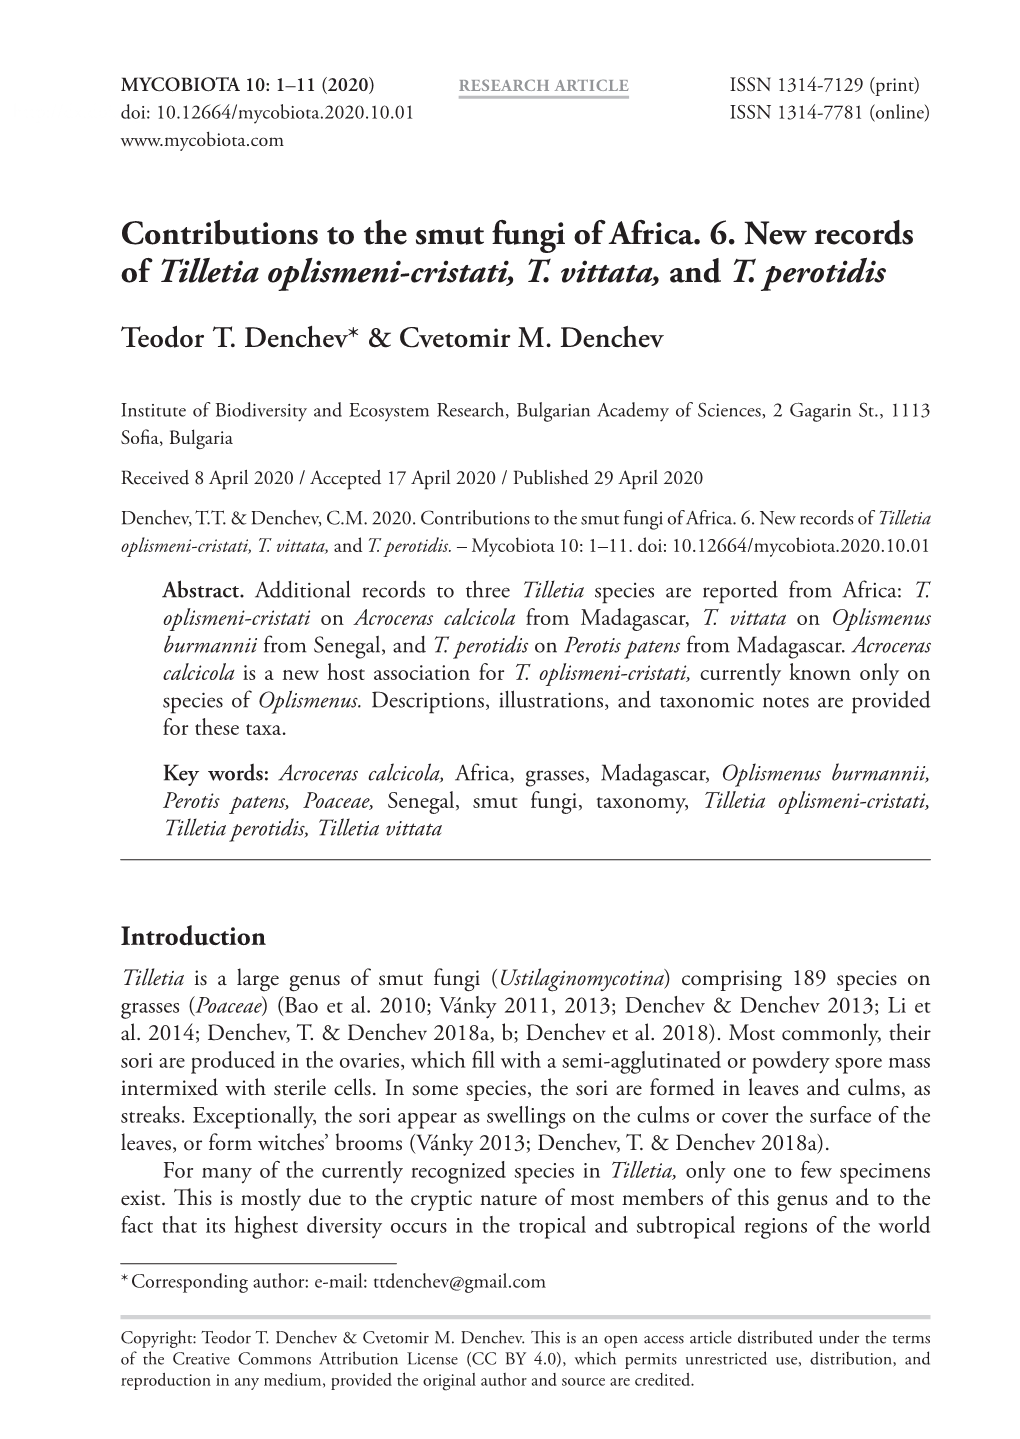 Contributions to the Smut Fungi of Africa. 6. New Records of Tilletia Oplismeni-Cristati, T